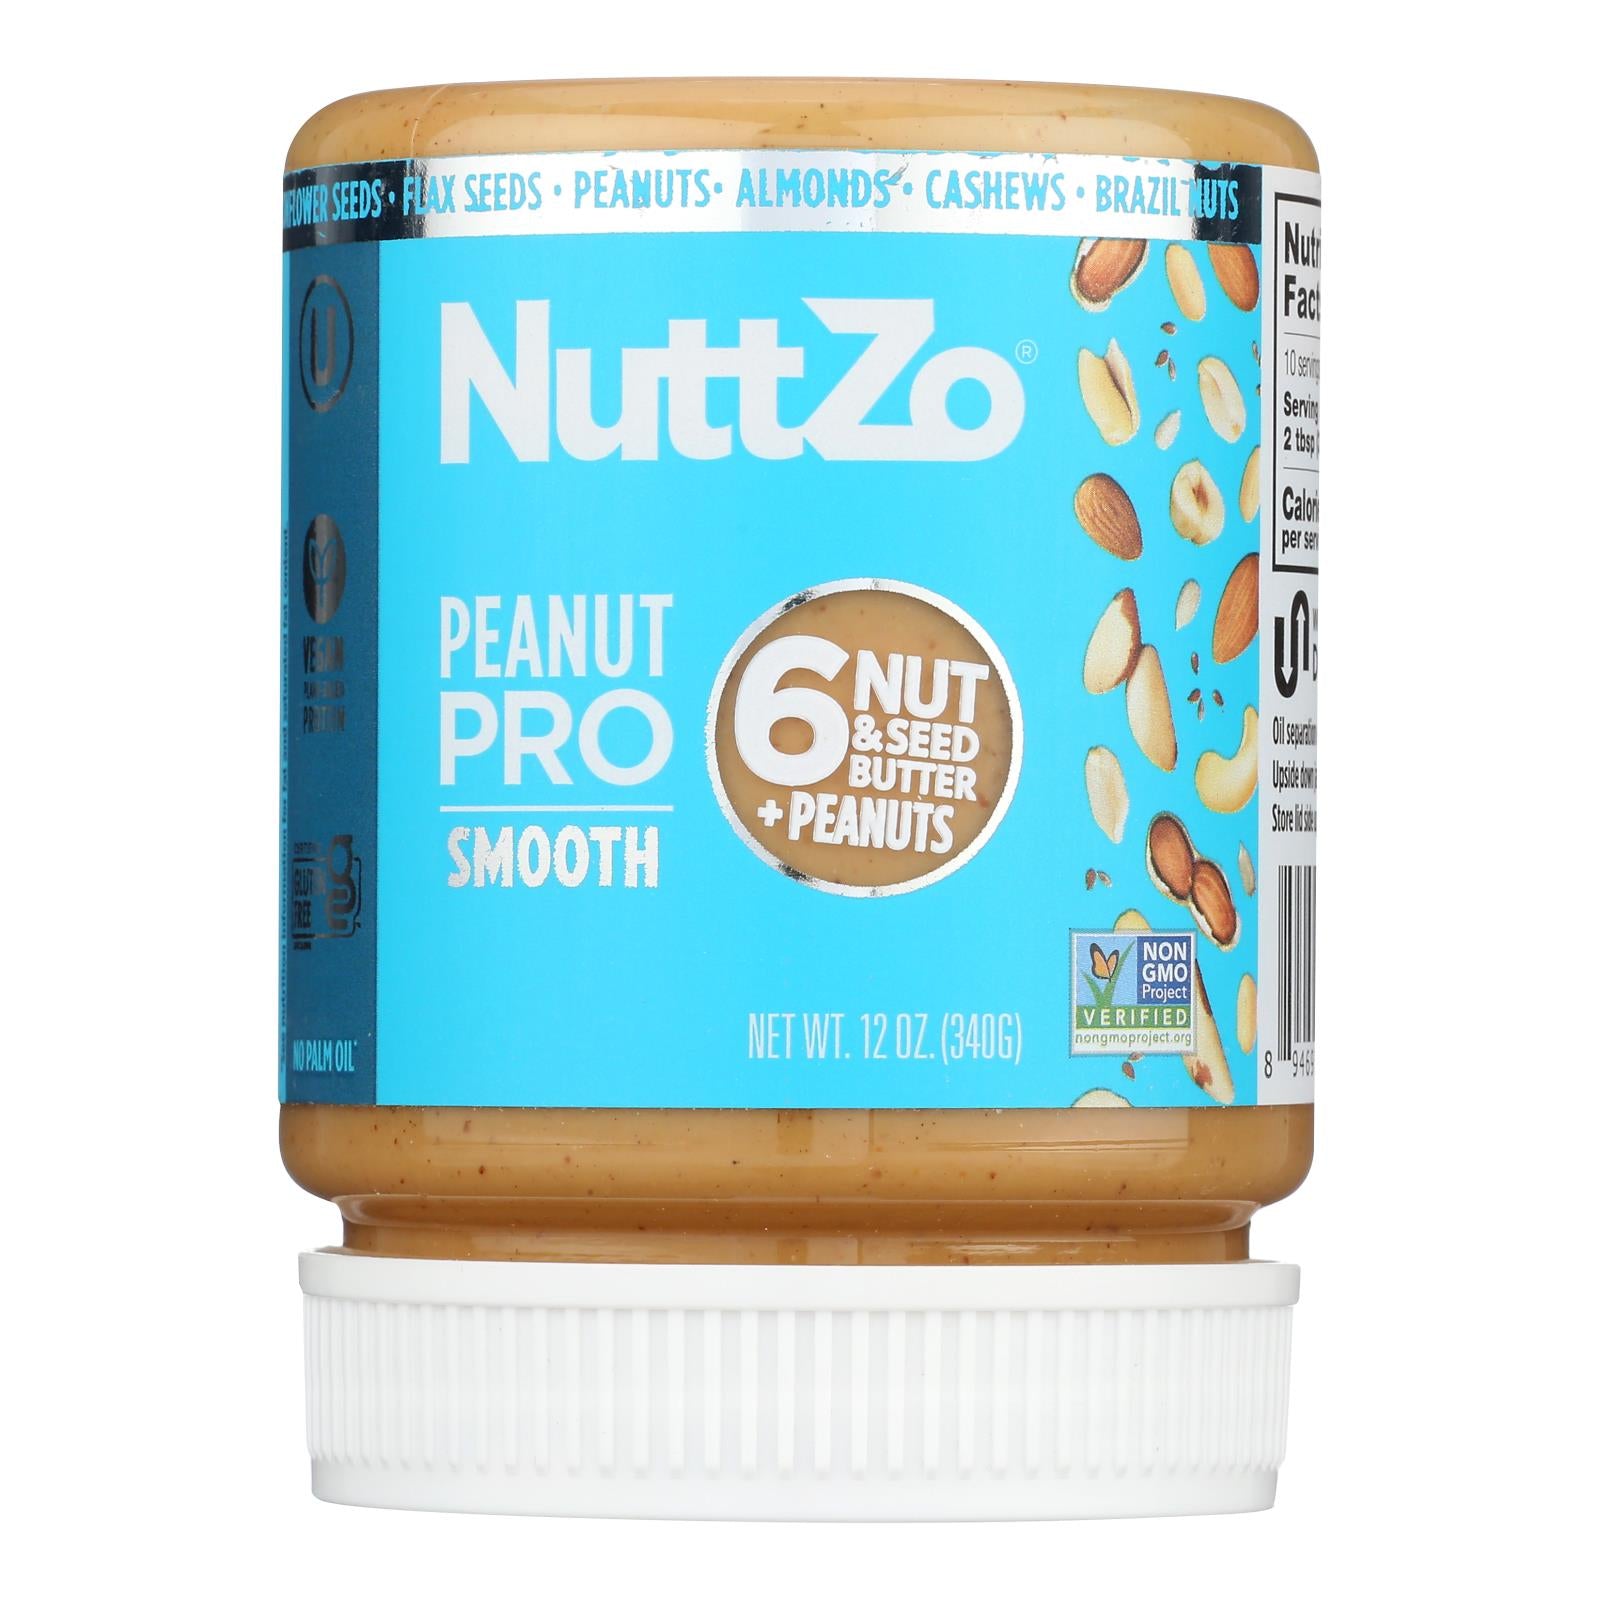 Nuttzo Peanut Butter, Smooth  - Case Of 6 - 12 Oz